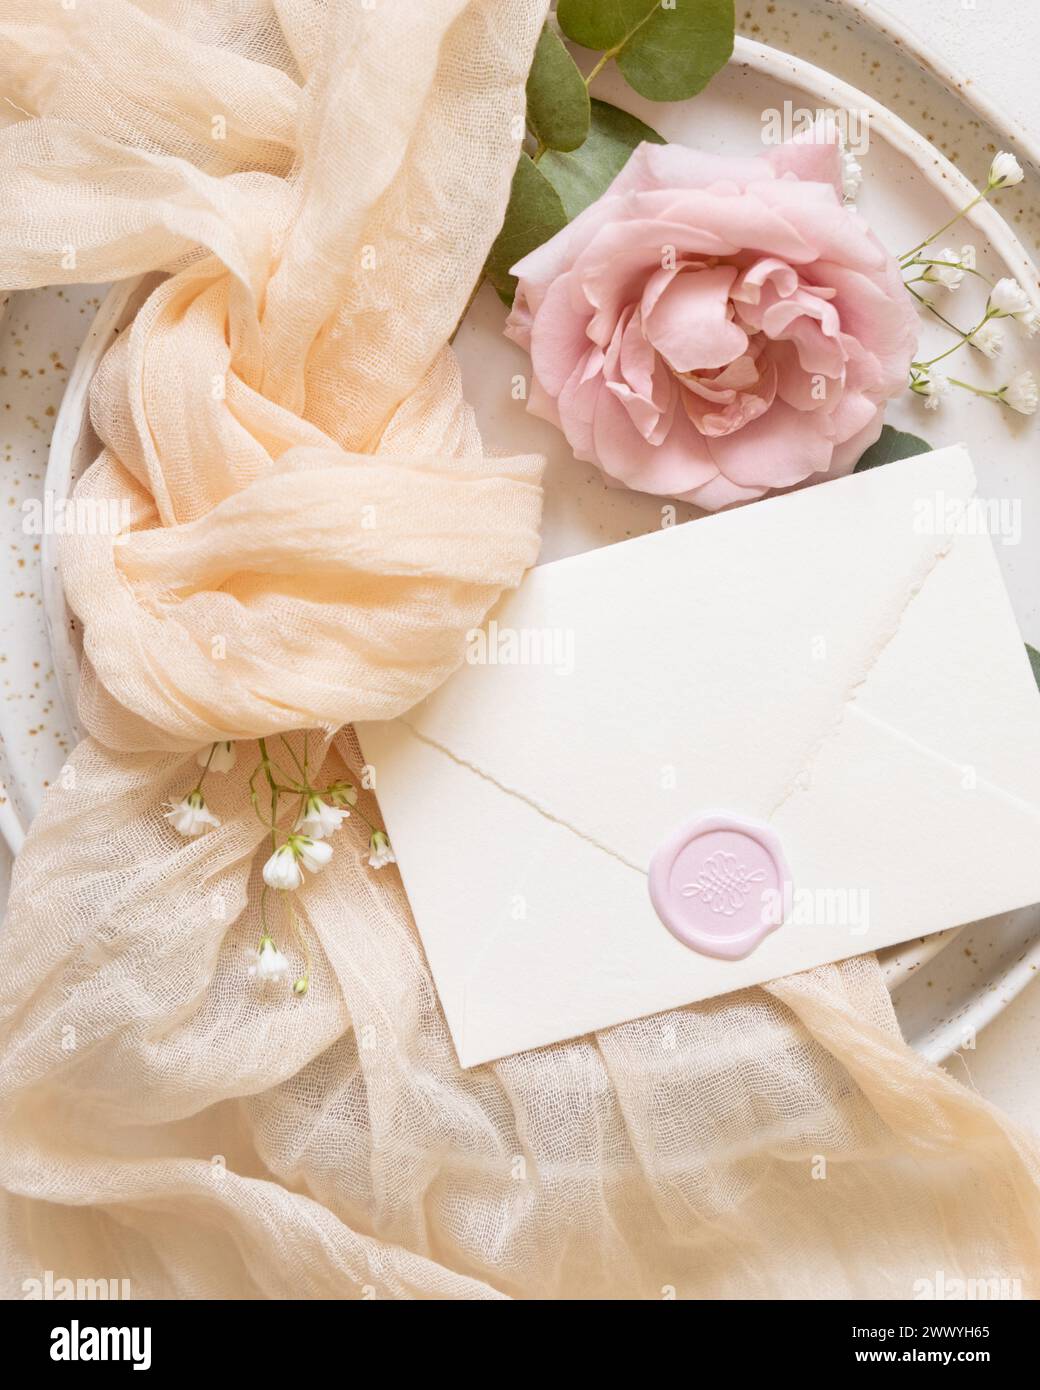 Sealed envelope near cream tulle fabric knot and light pink roses on plates top view, copy space. Wedding stationery mockup. Romantic table place with Stock Photo